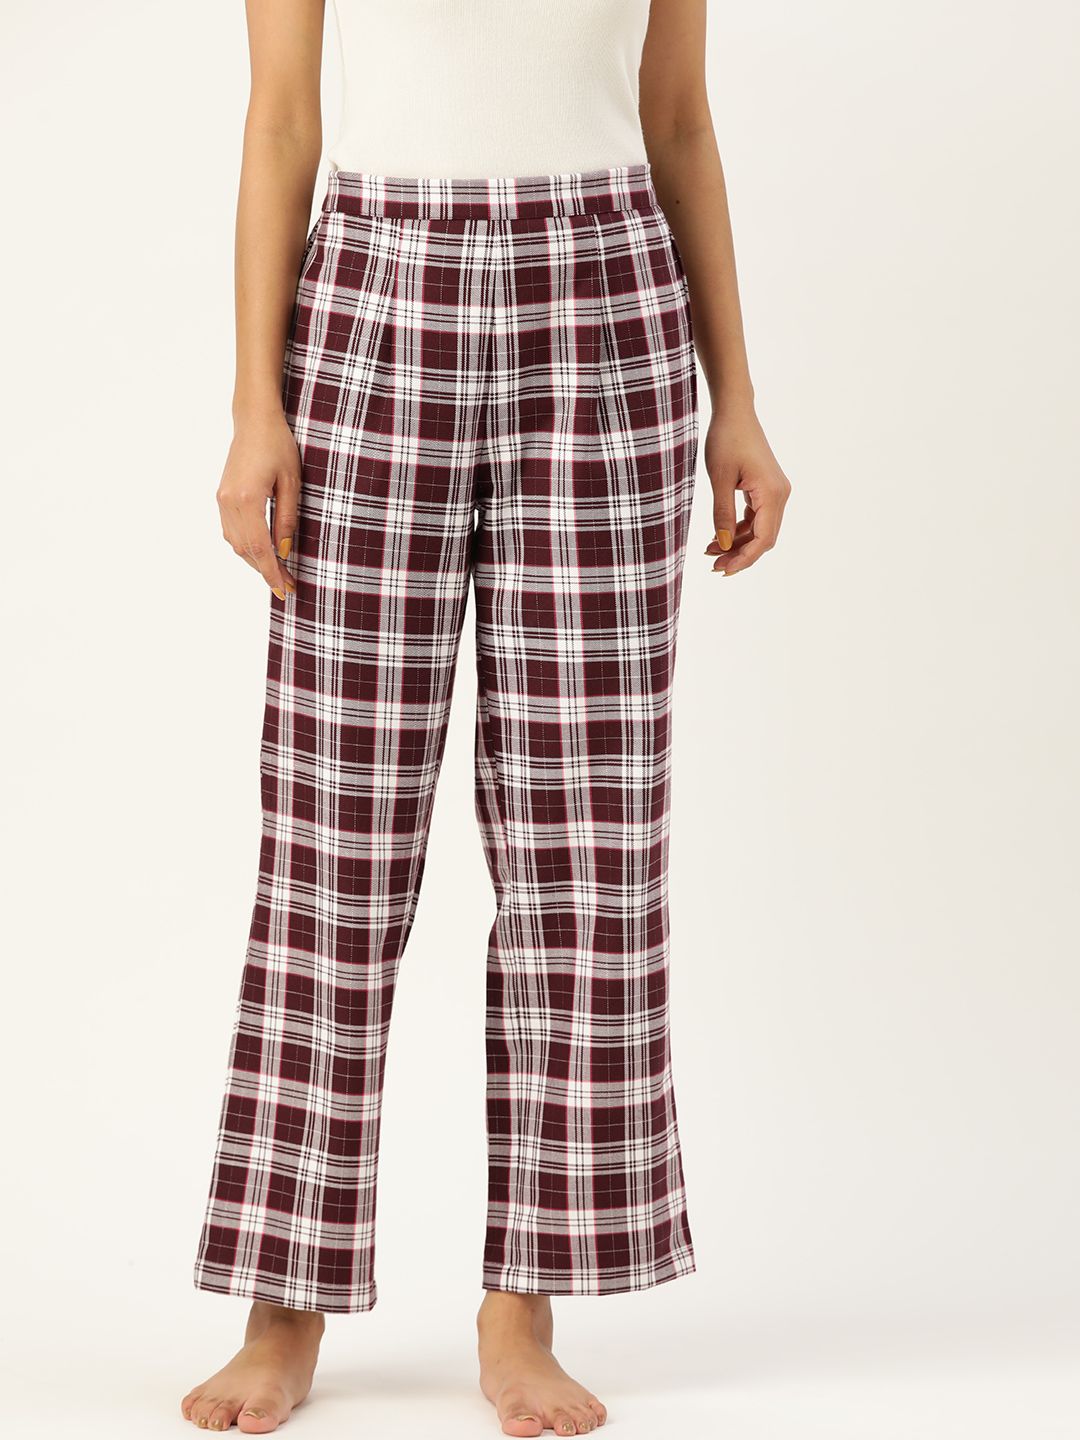 ETC Women Maroon & White Checked Pure Cotton Lounge Pants Price in India